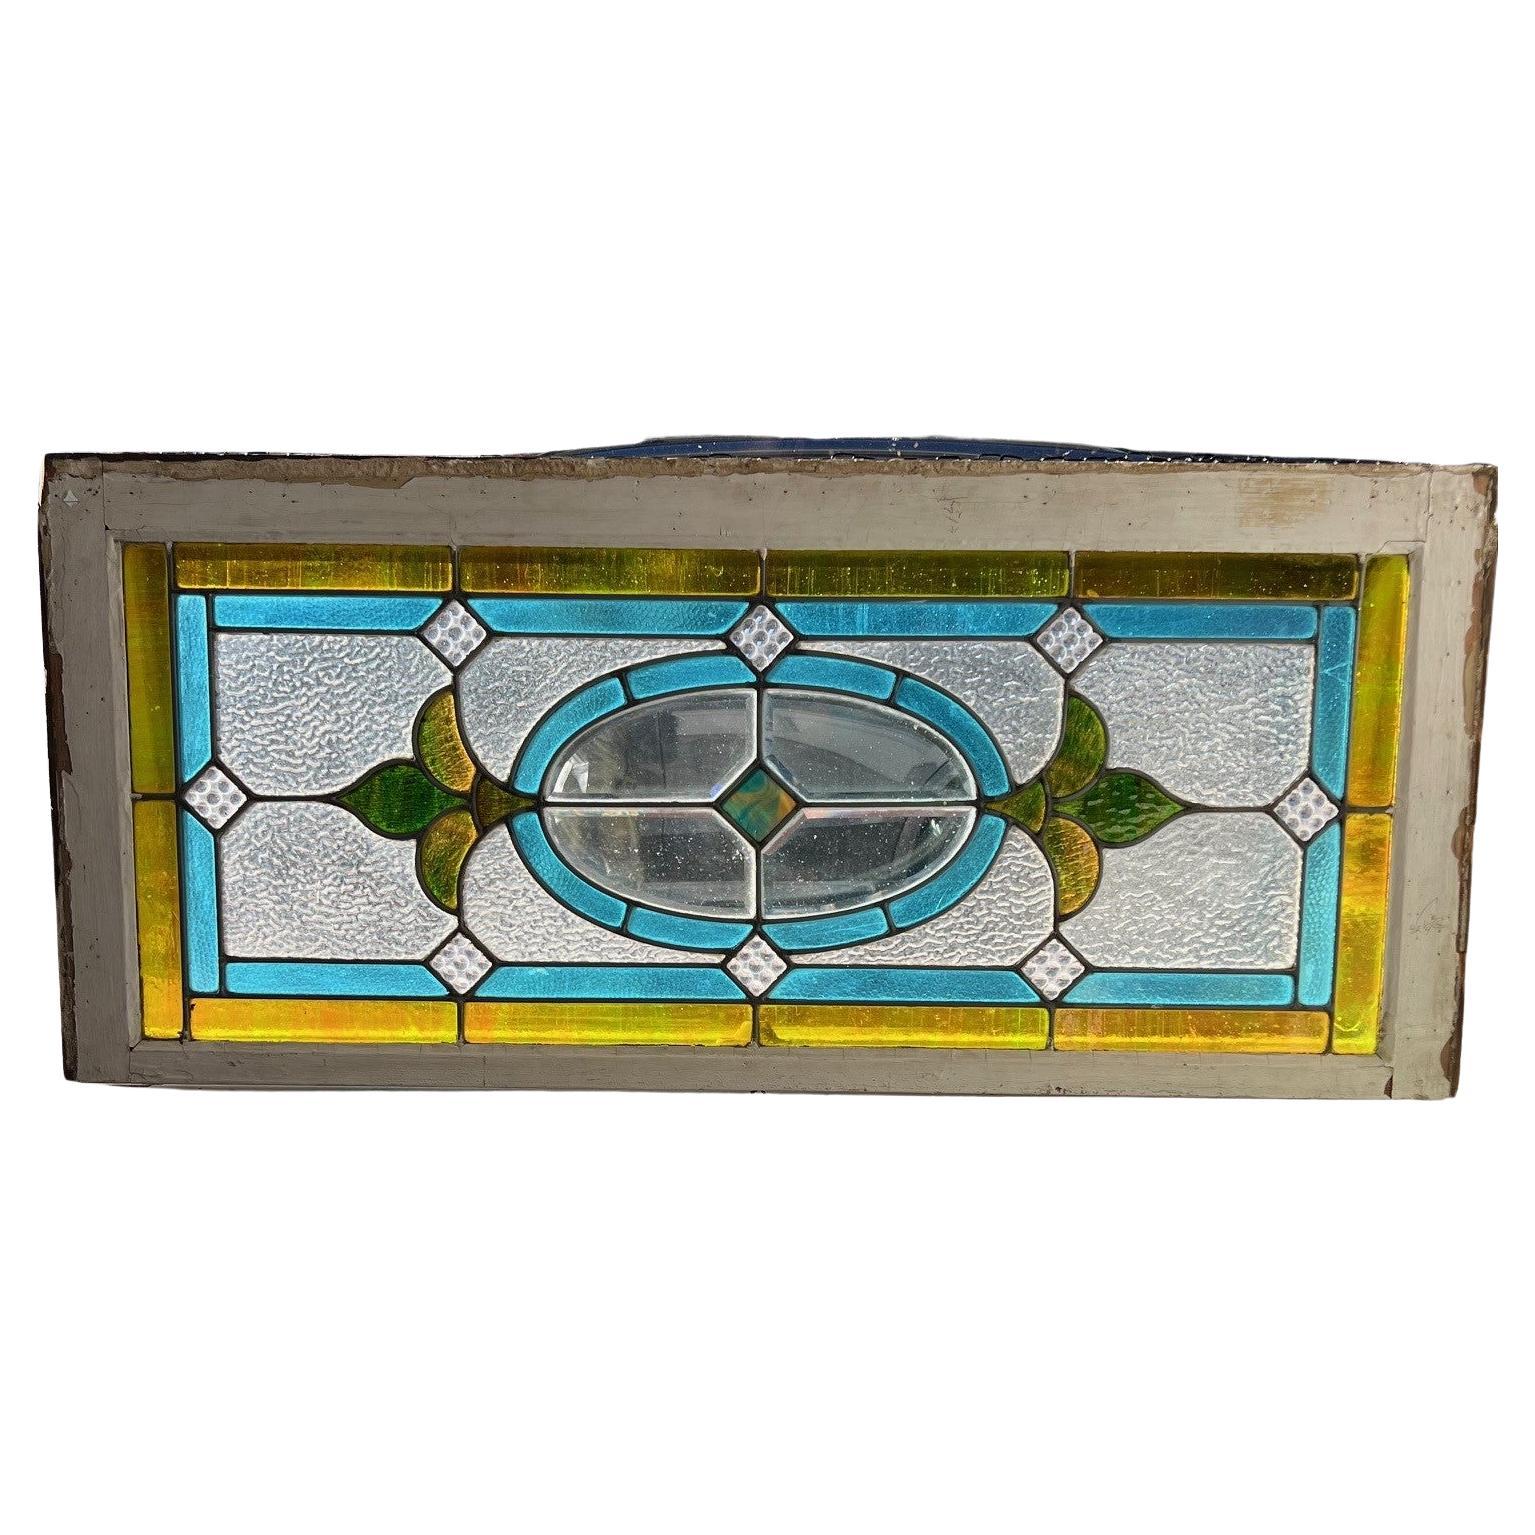 Antique Stained Glass Window, Beveled Glass Center Original Wood Frame For Sale